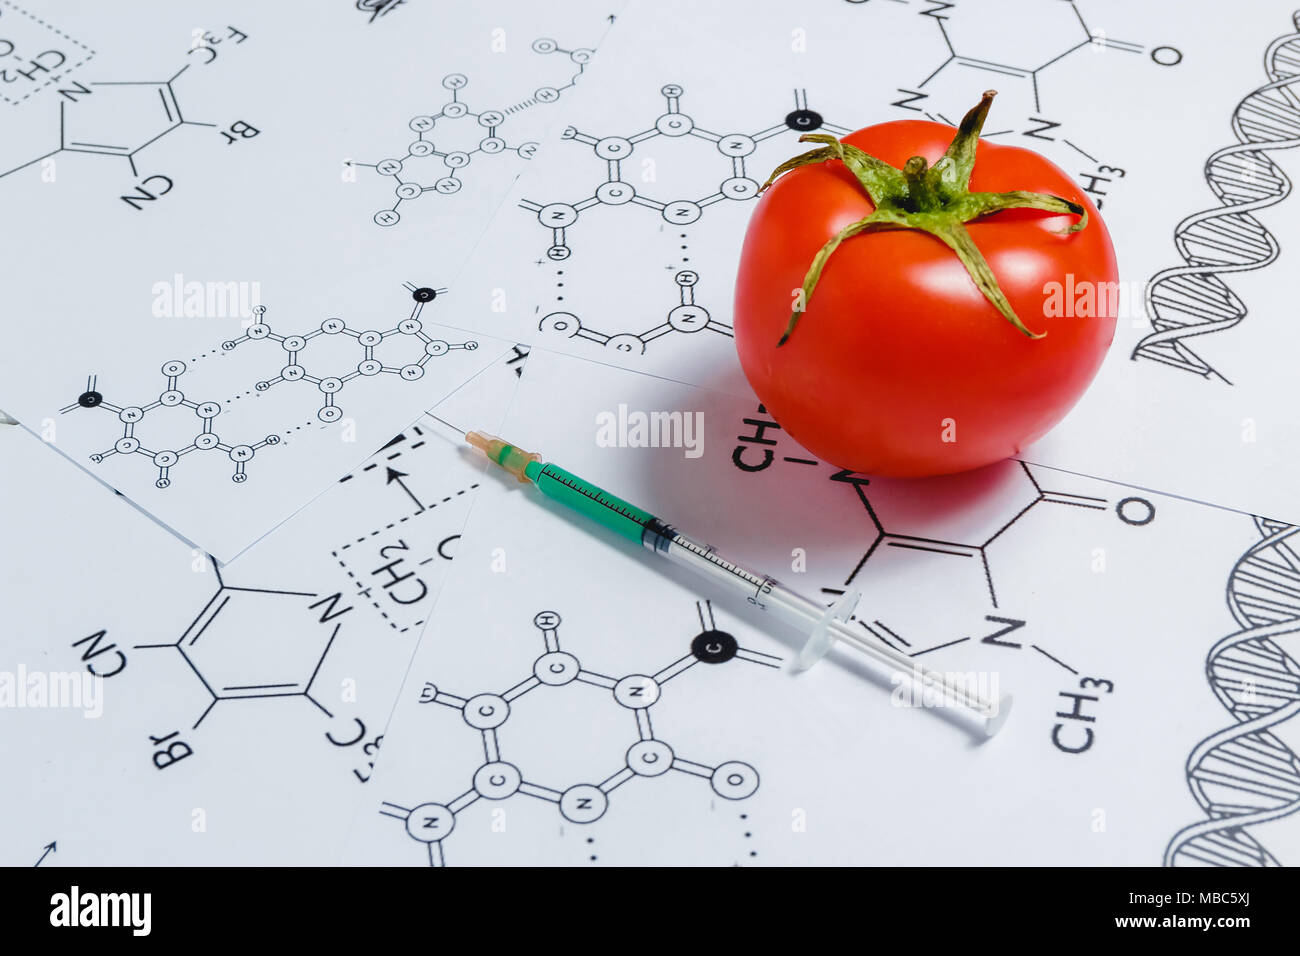 Concept of Non-natural Products, Gmo. Syringe and Red Tomato on White Background with Chemical Formula Stock Photo